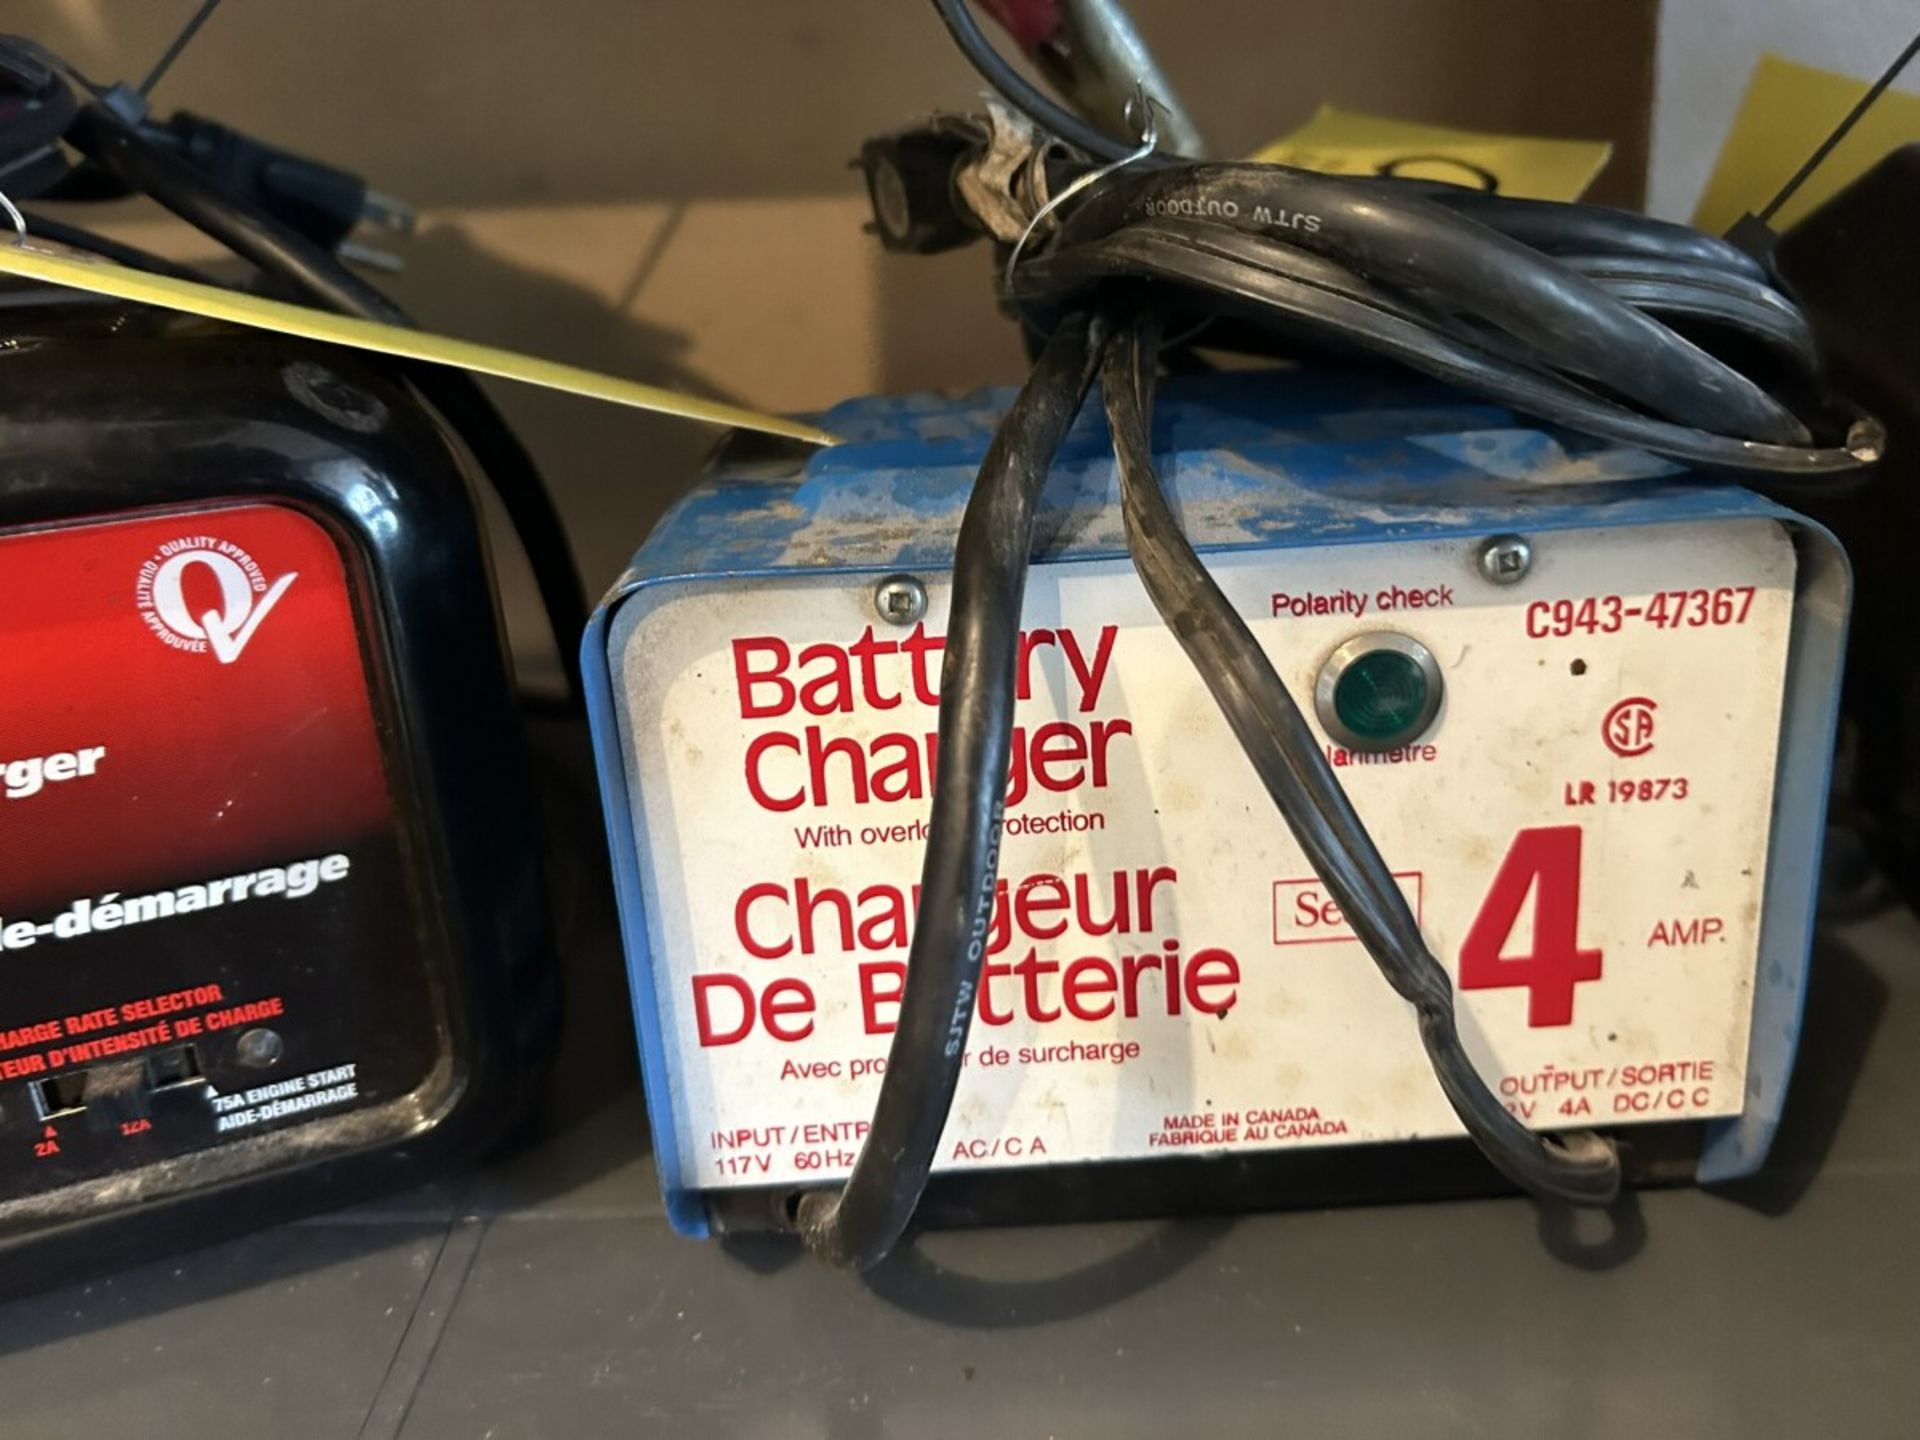 LASER 10 & SEARS BATTERY CHARGERS